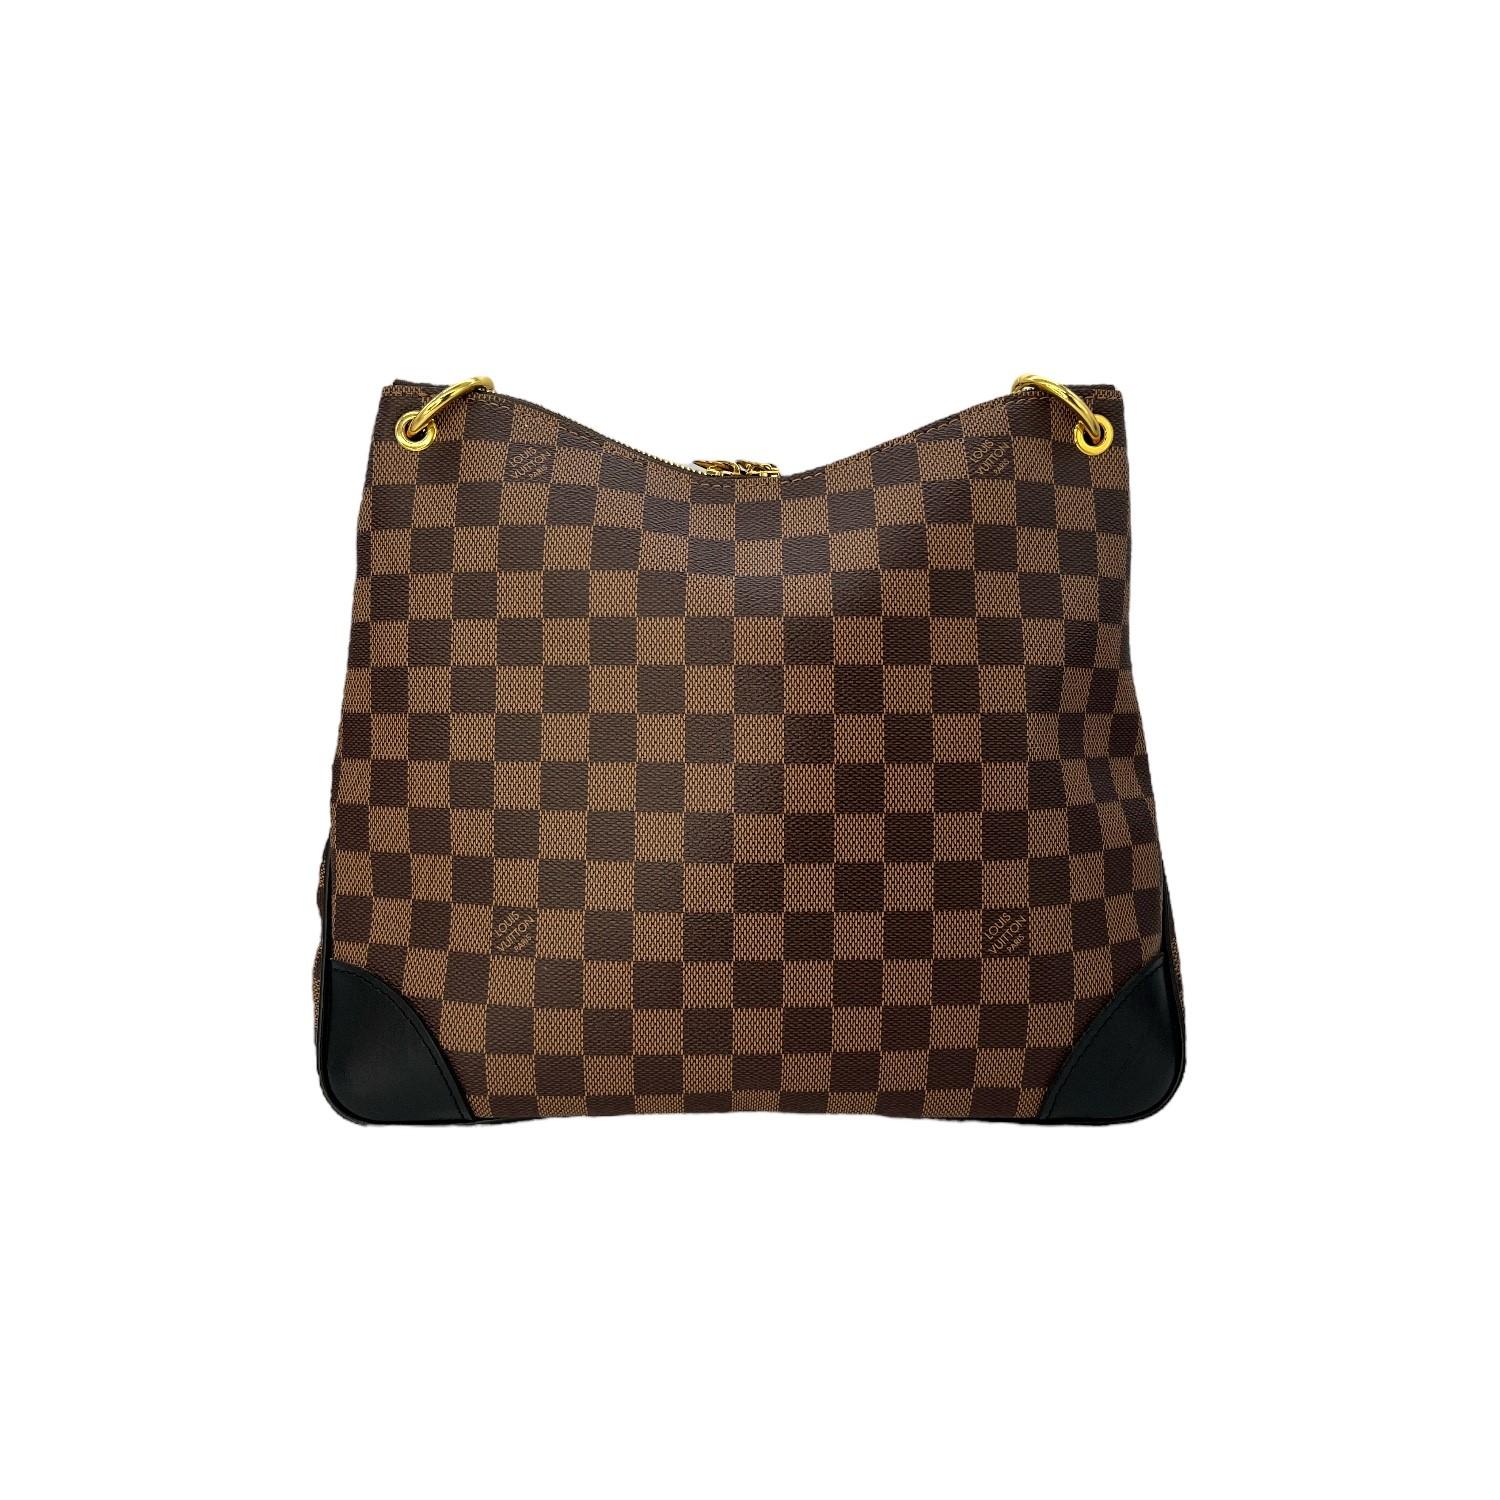 This Louis Vuitton Damier Ebene Odeon PM is finely crafted of the classic Louis Vuitton Damier Ebene coated canvas with leather trimming and gold-tone hardware features. It has a flat black leather shoulder strap. It has a frontal slip pocket that